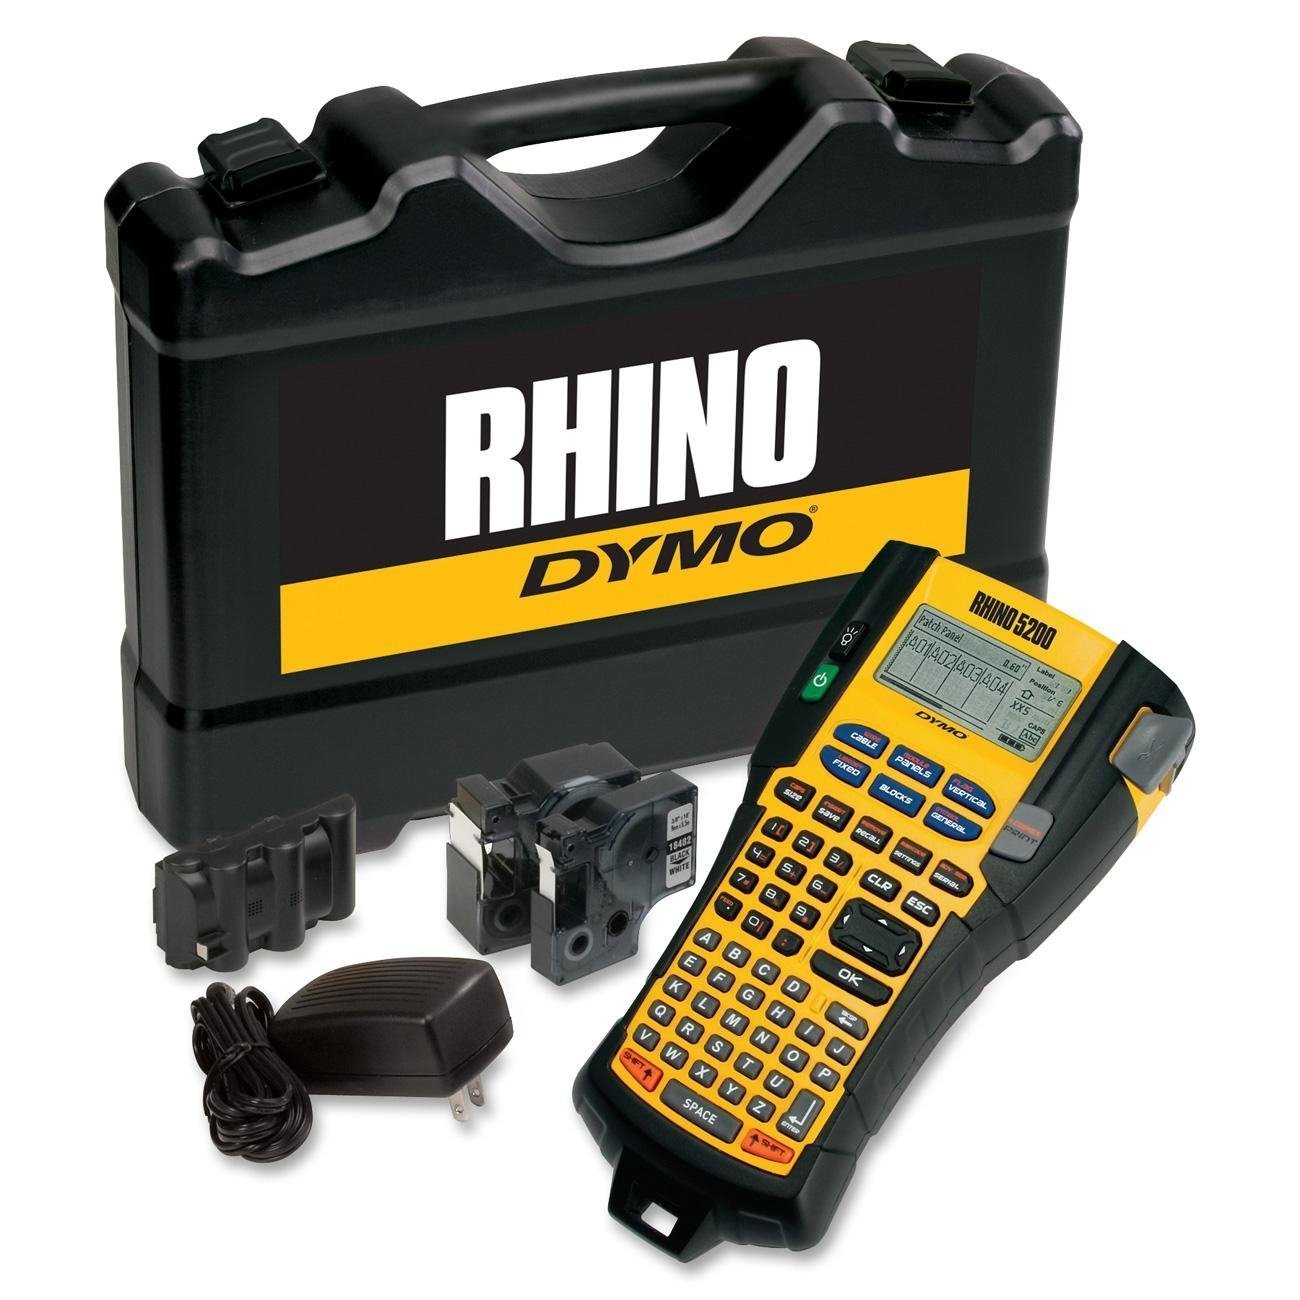 An image of DYMO RHINO 5200 Kit Industrial Label Printer with Hard Carry Case